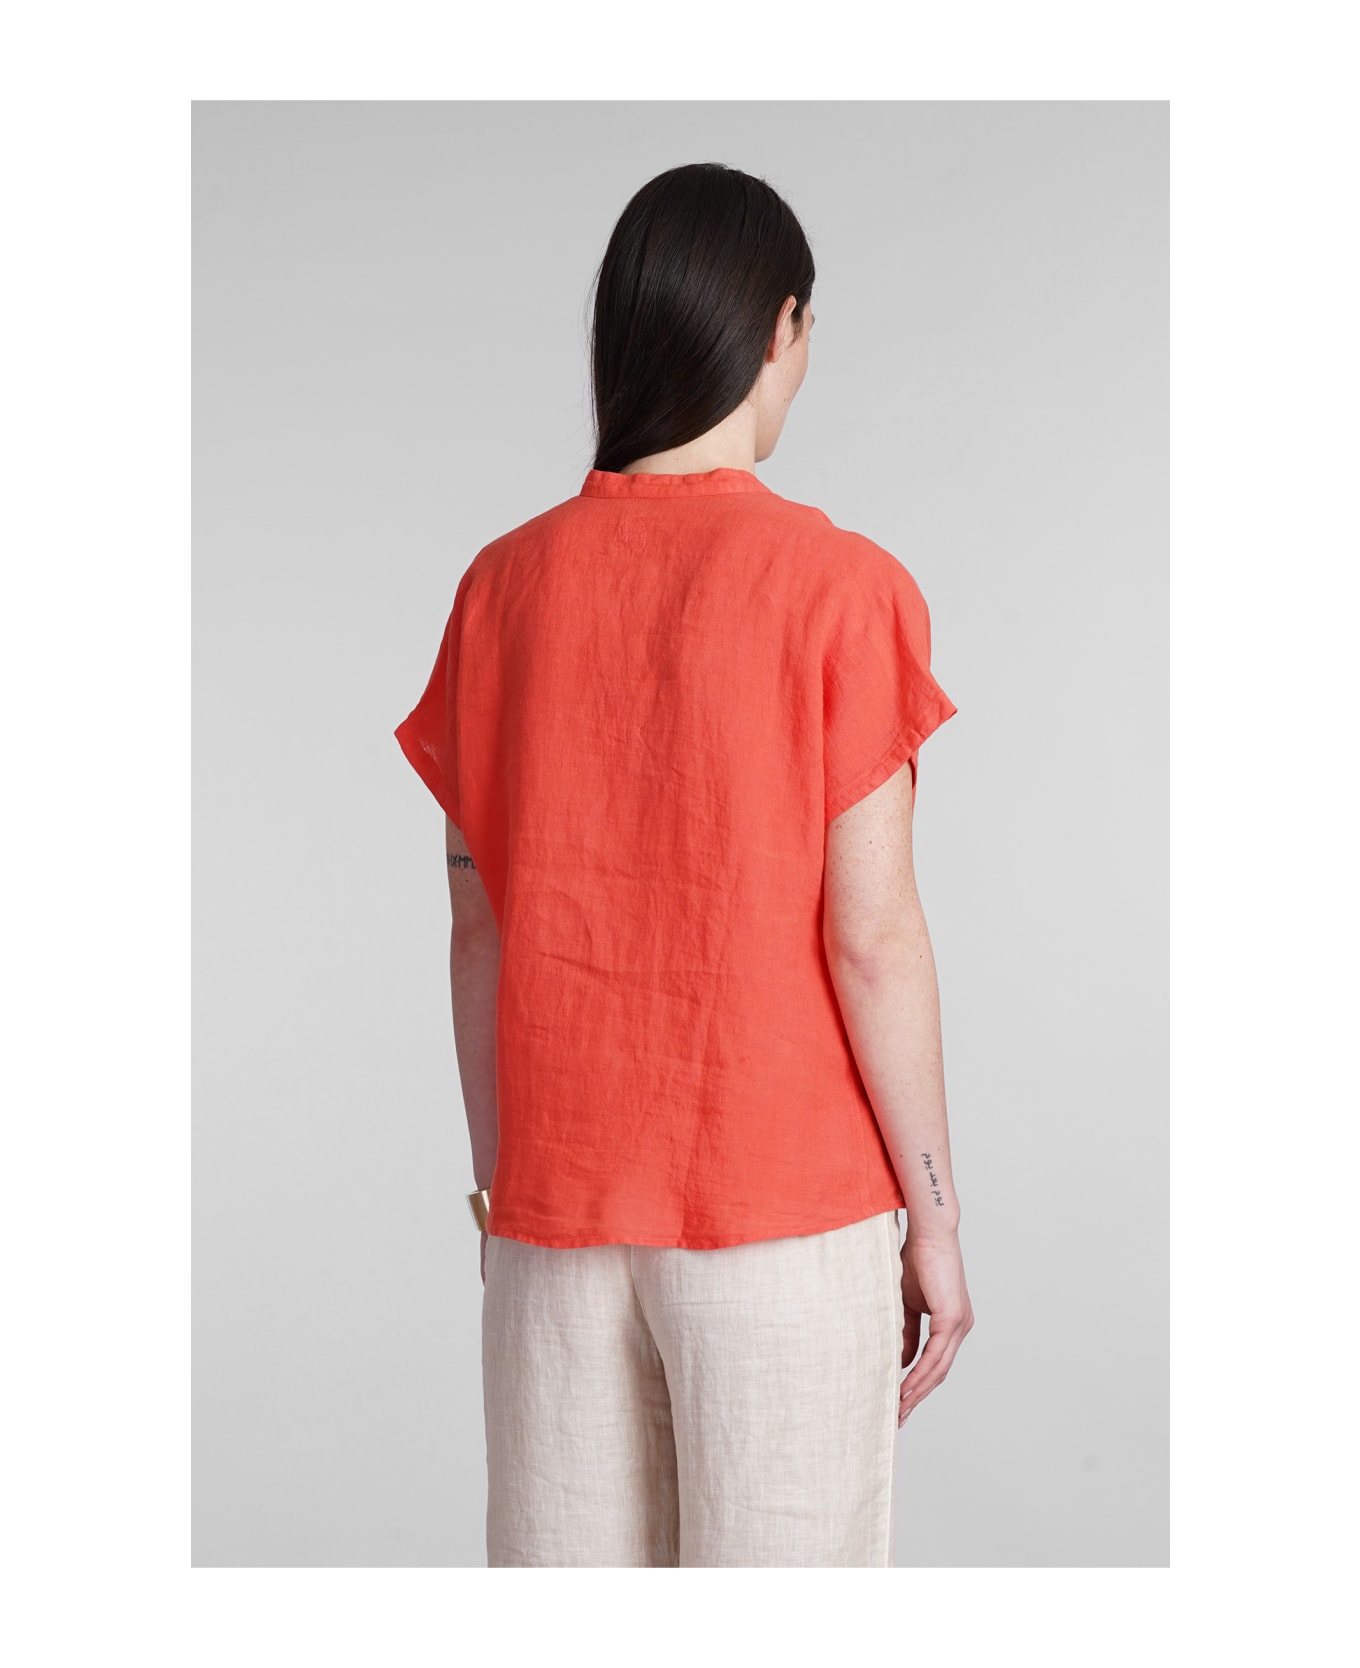 120% Lino Blouse In Red Linen - red